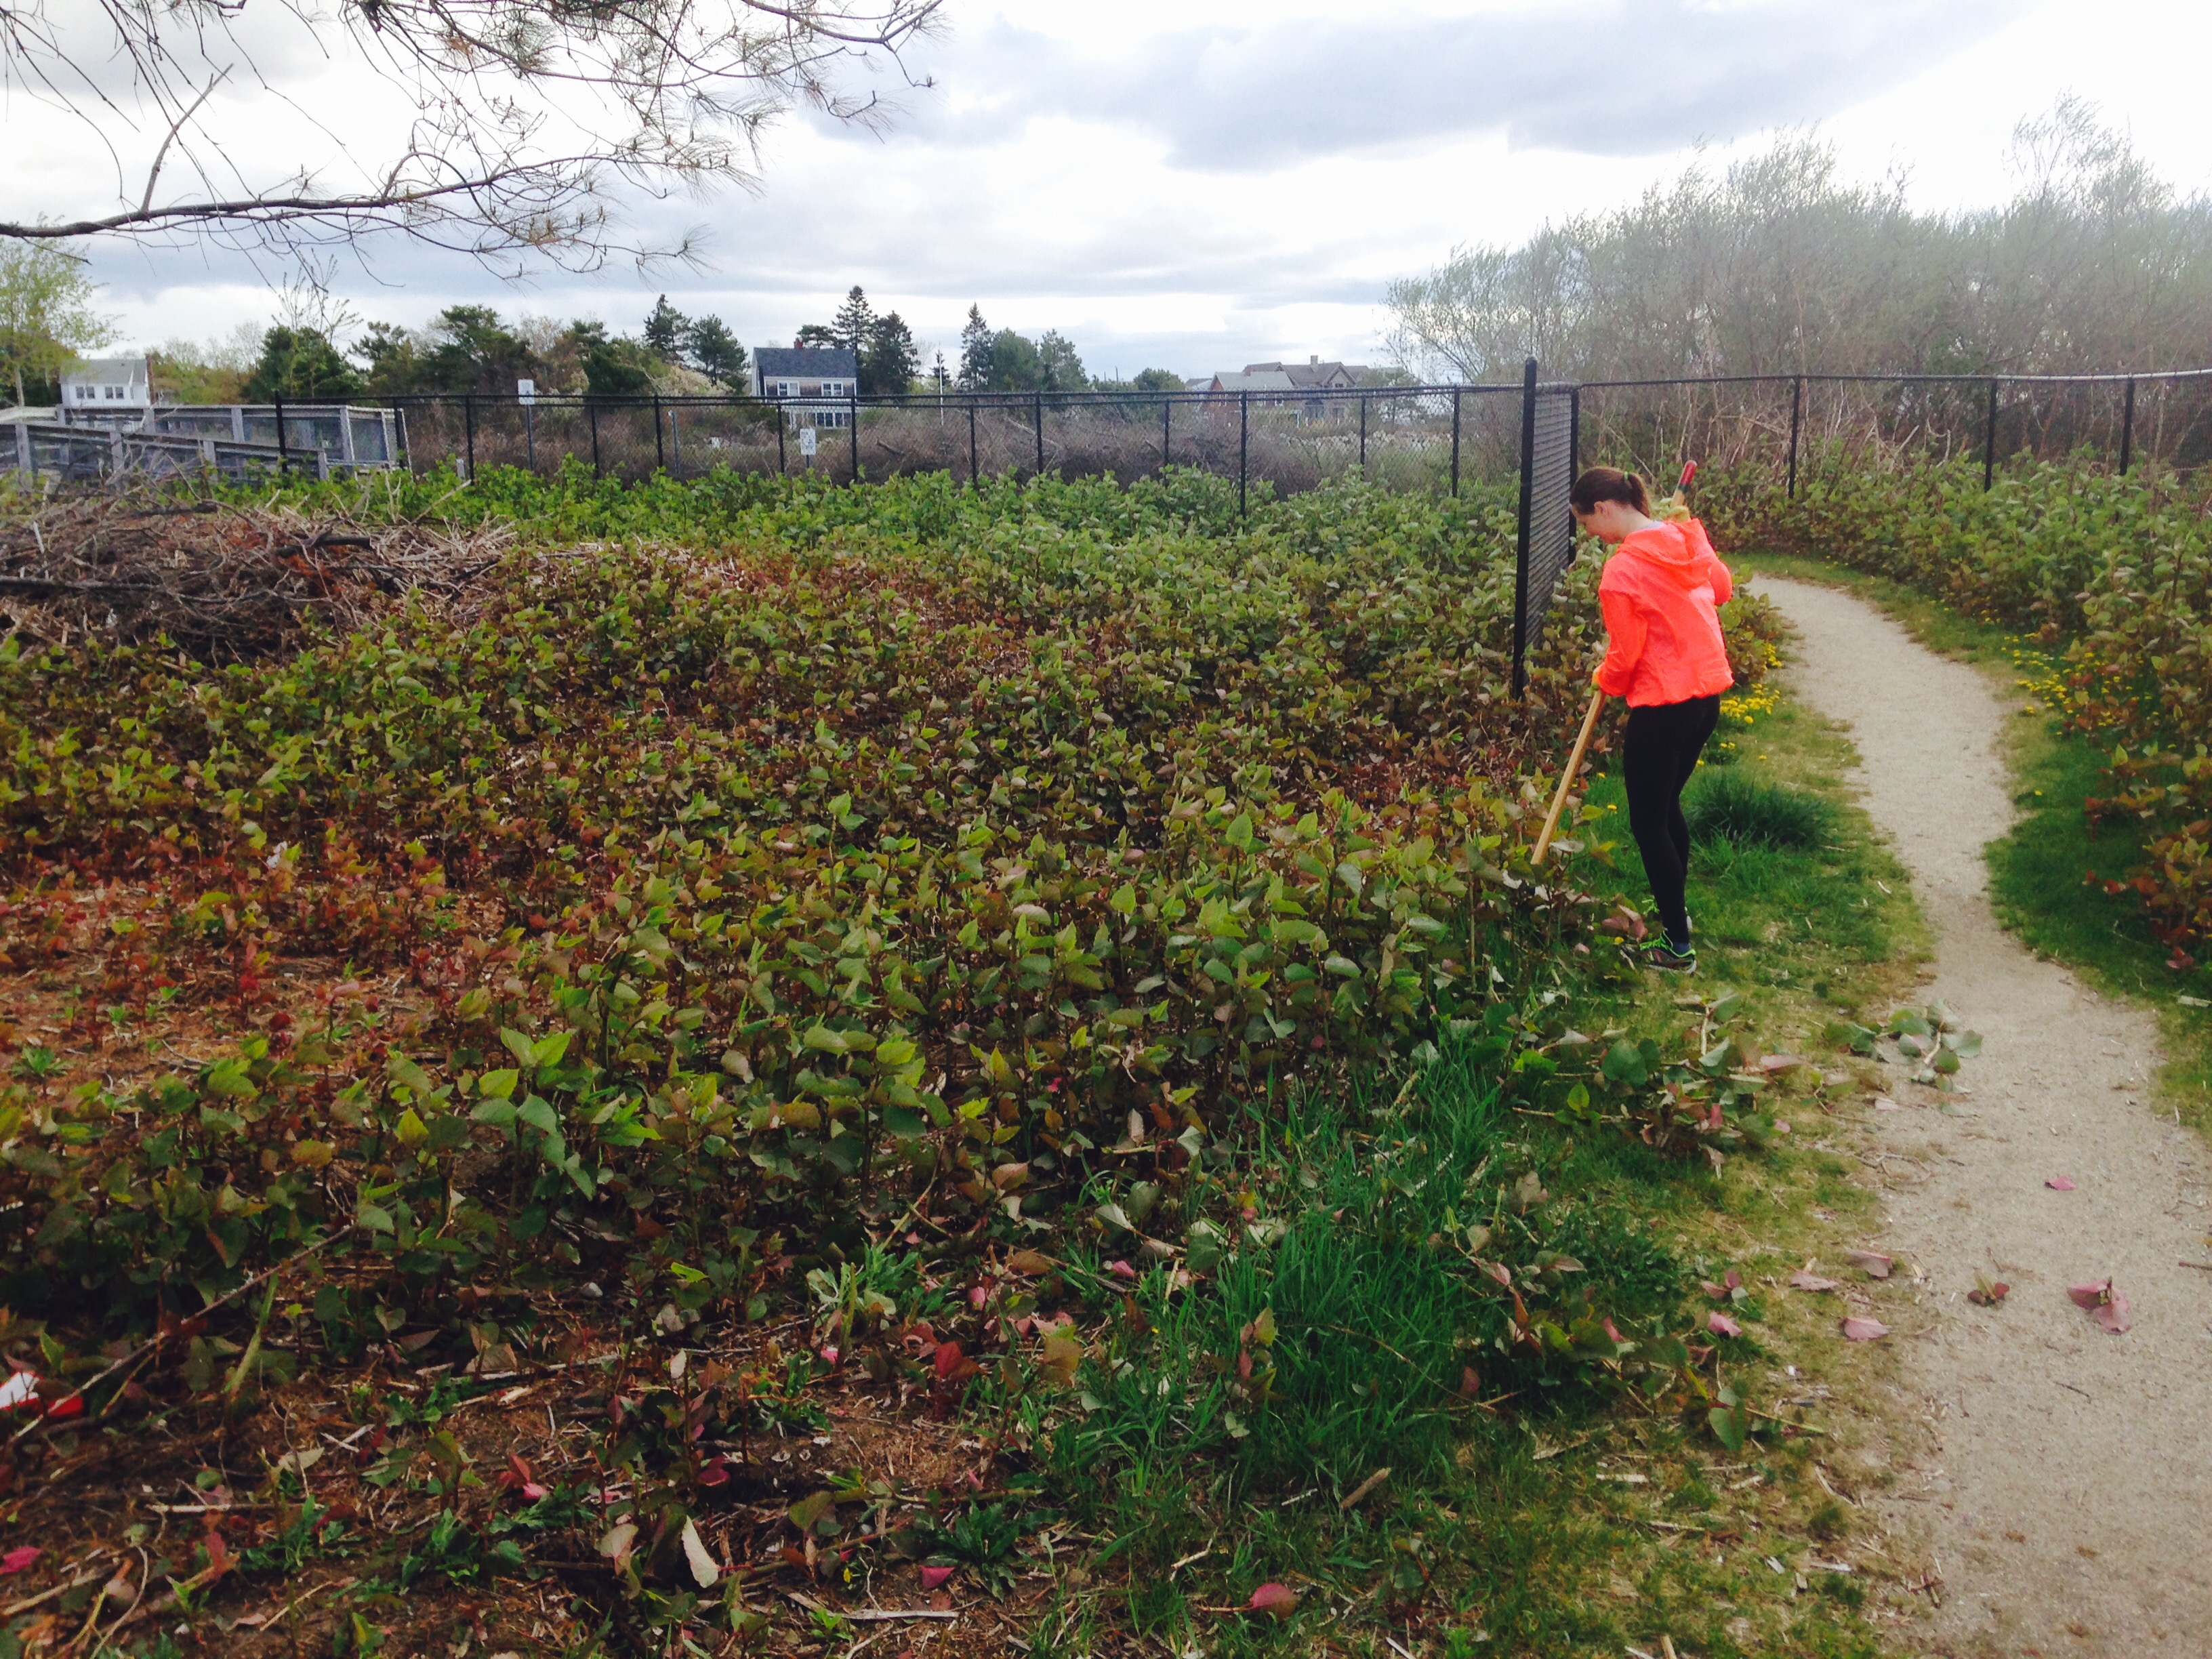 A young woman in a bright orange coat stands at the edge of a field completely covered in the invasive plant, the Japanese knotweed. She holds a digging tool in her hand and prepares to remove the plant manually. 